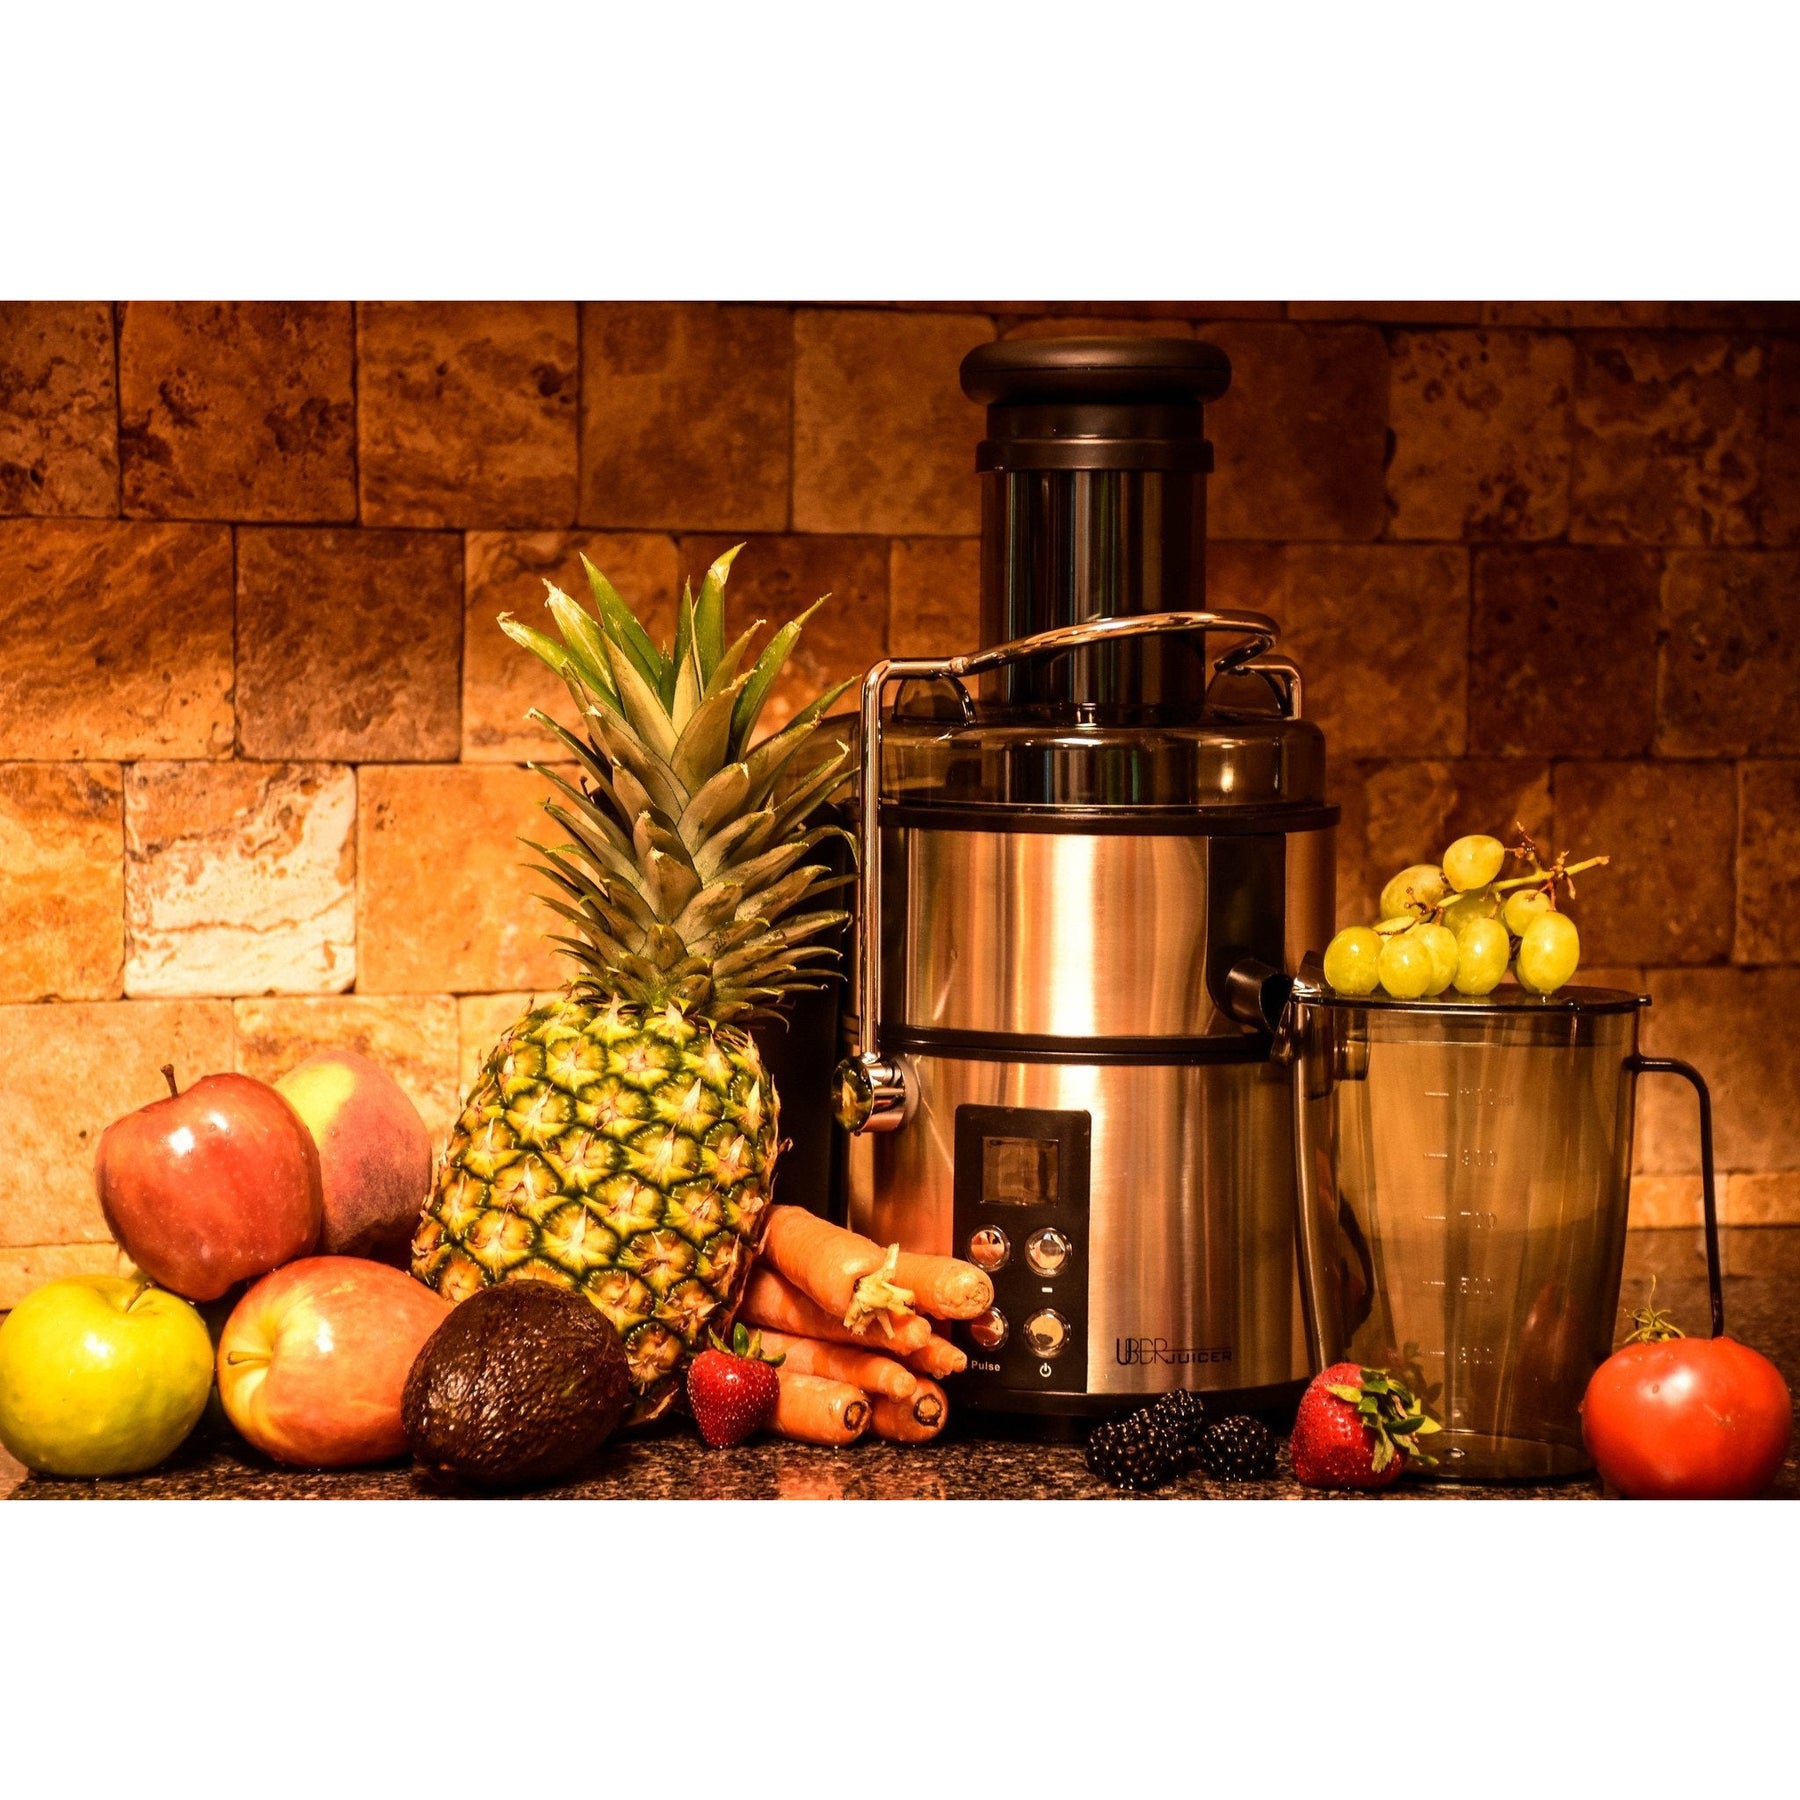 Are Juicers and Juice Extractors the Same Appliance? - Continental